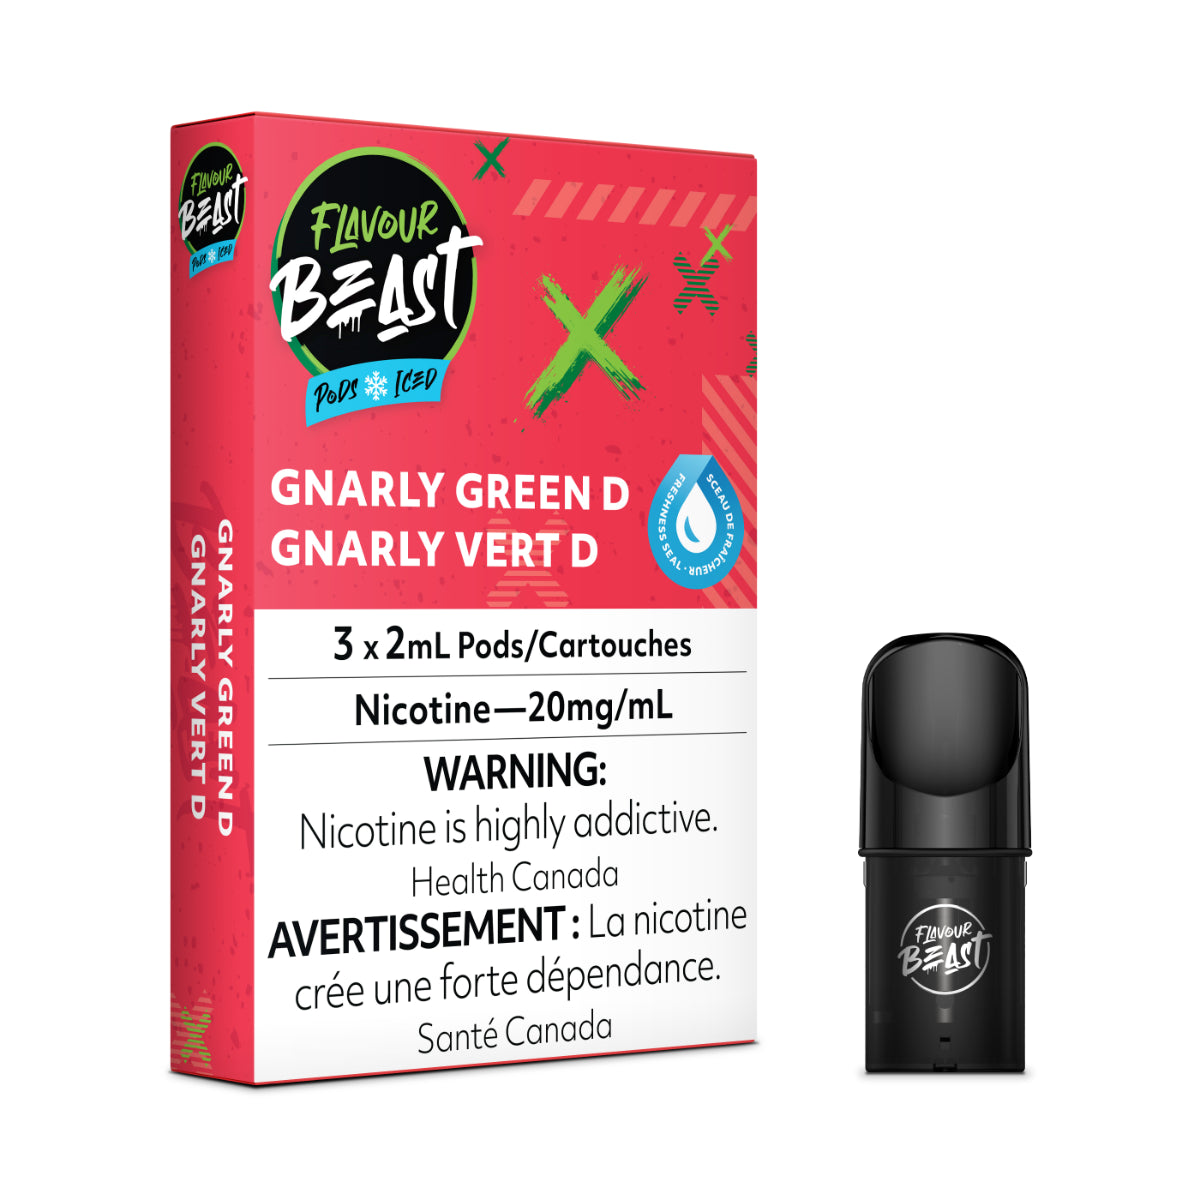 Gnarly Green D - Flavour Beast Pod Pack - 20mg - EXCISED